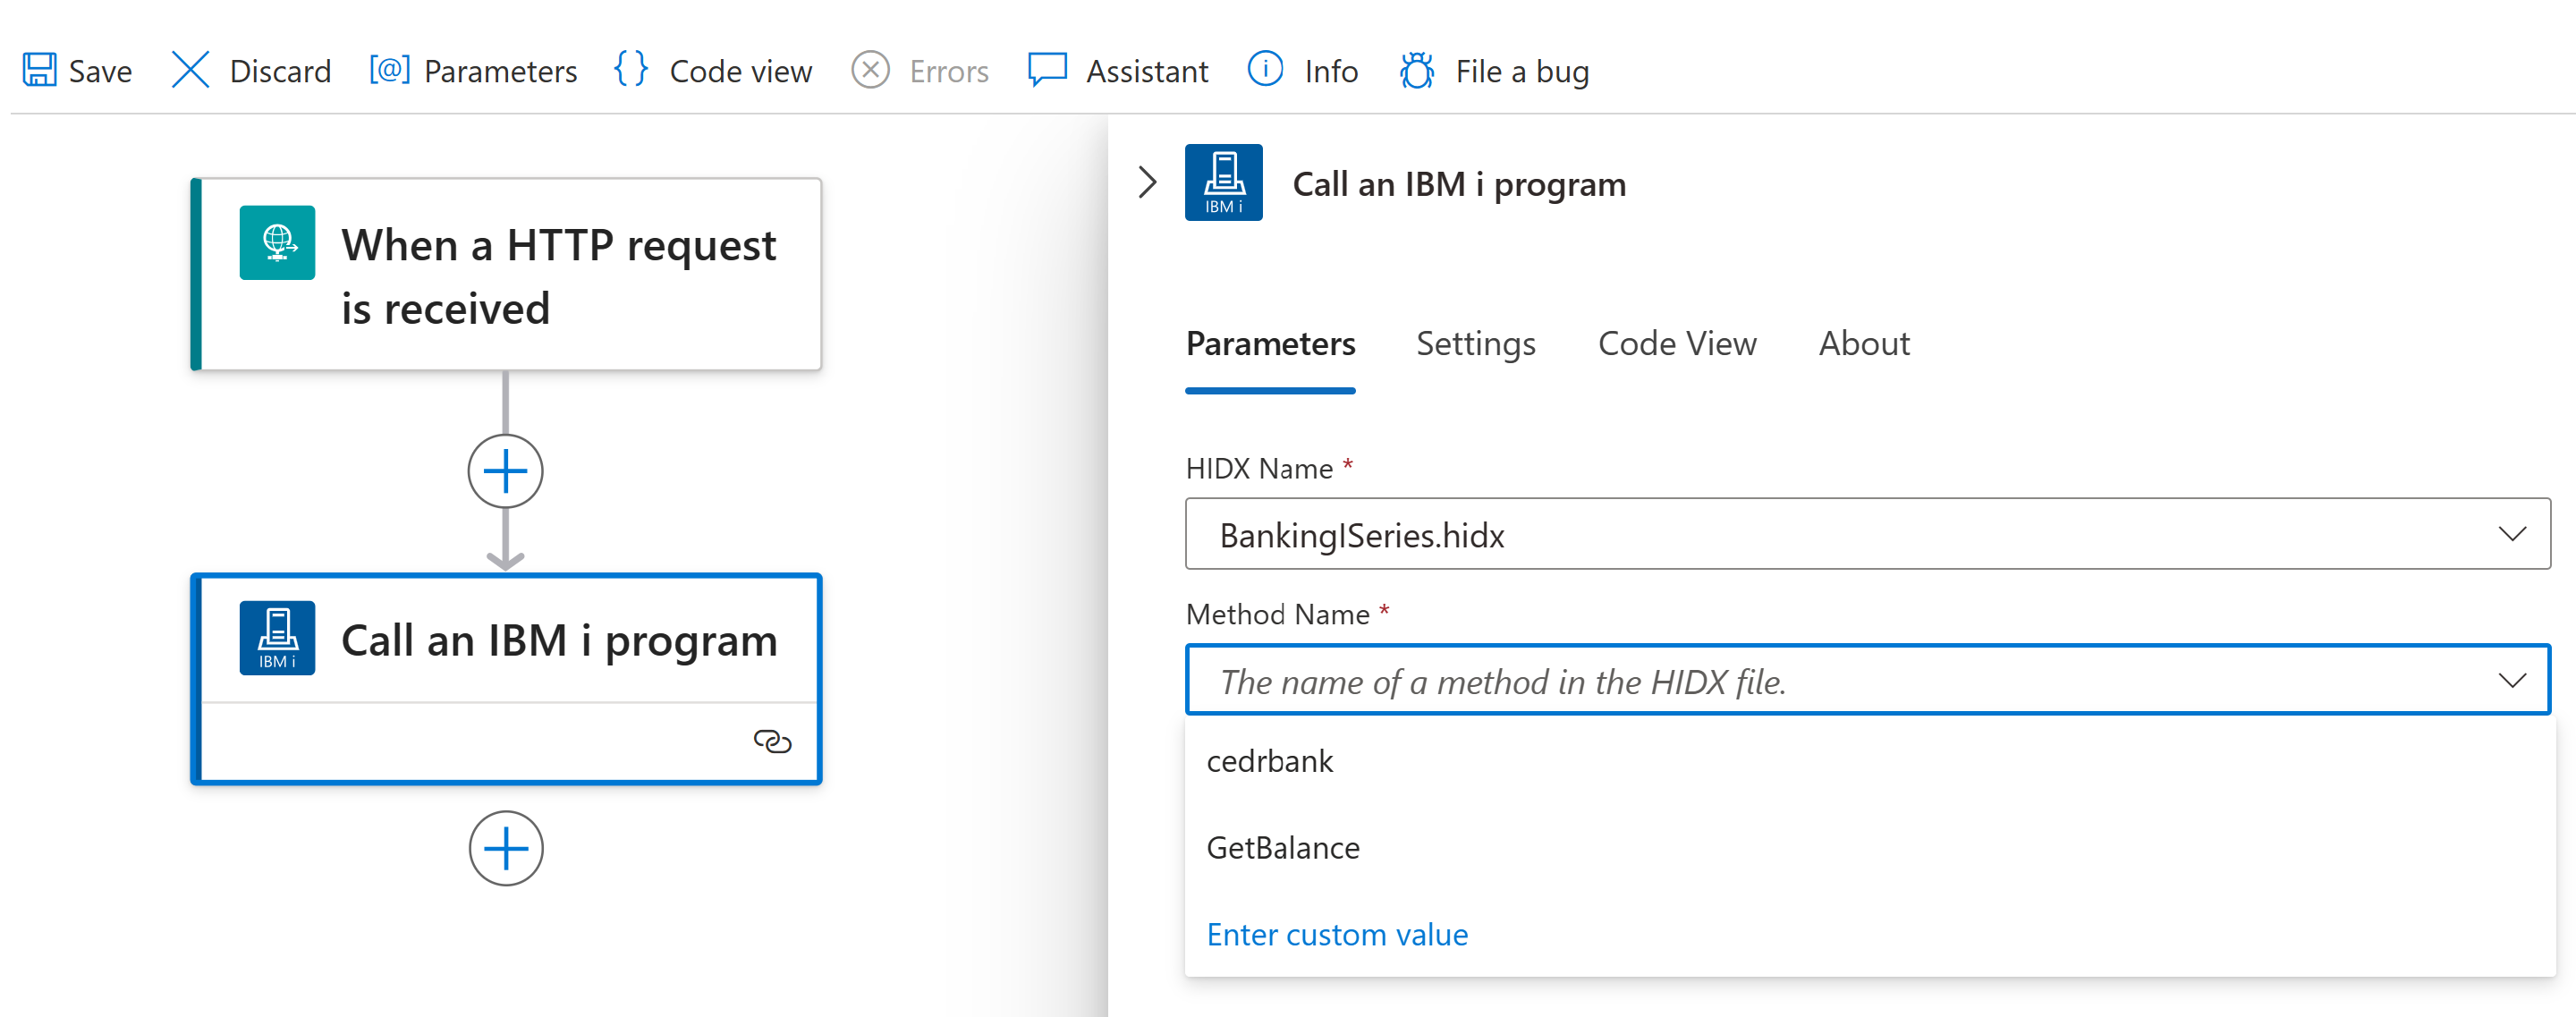 Screenshot shows IBM i action with selected HIDX file and method.